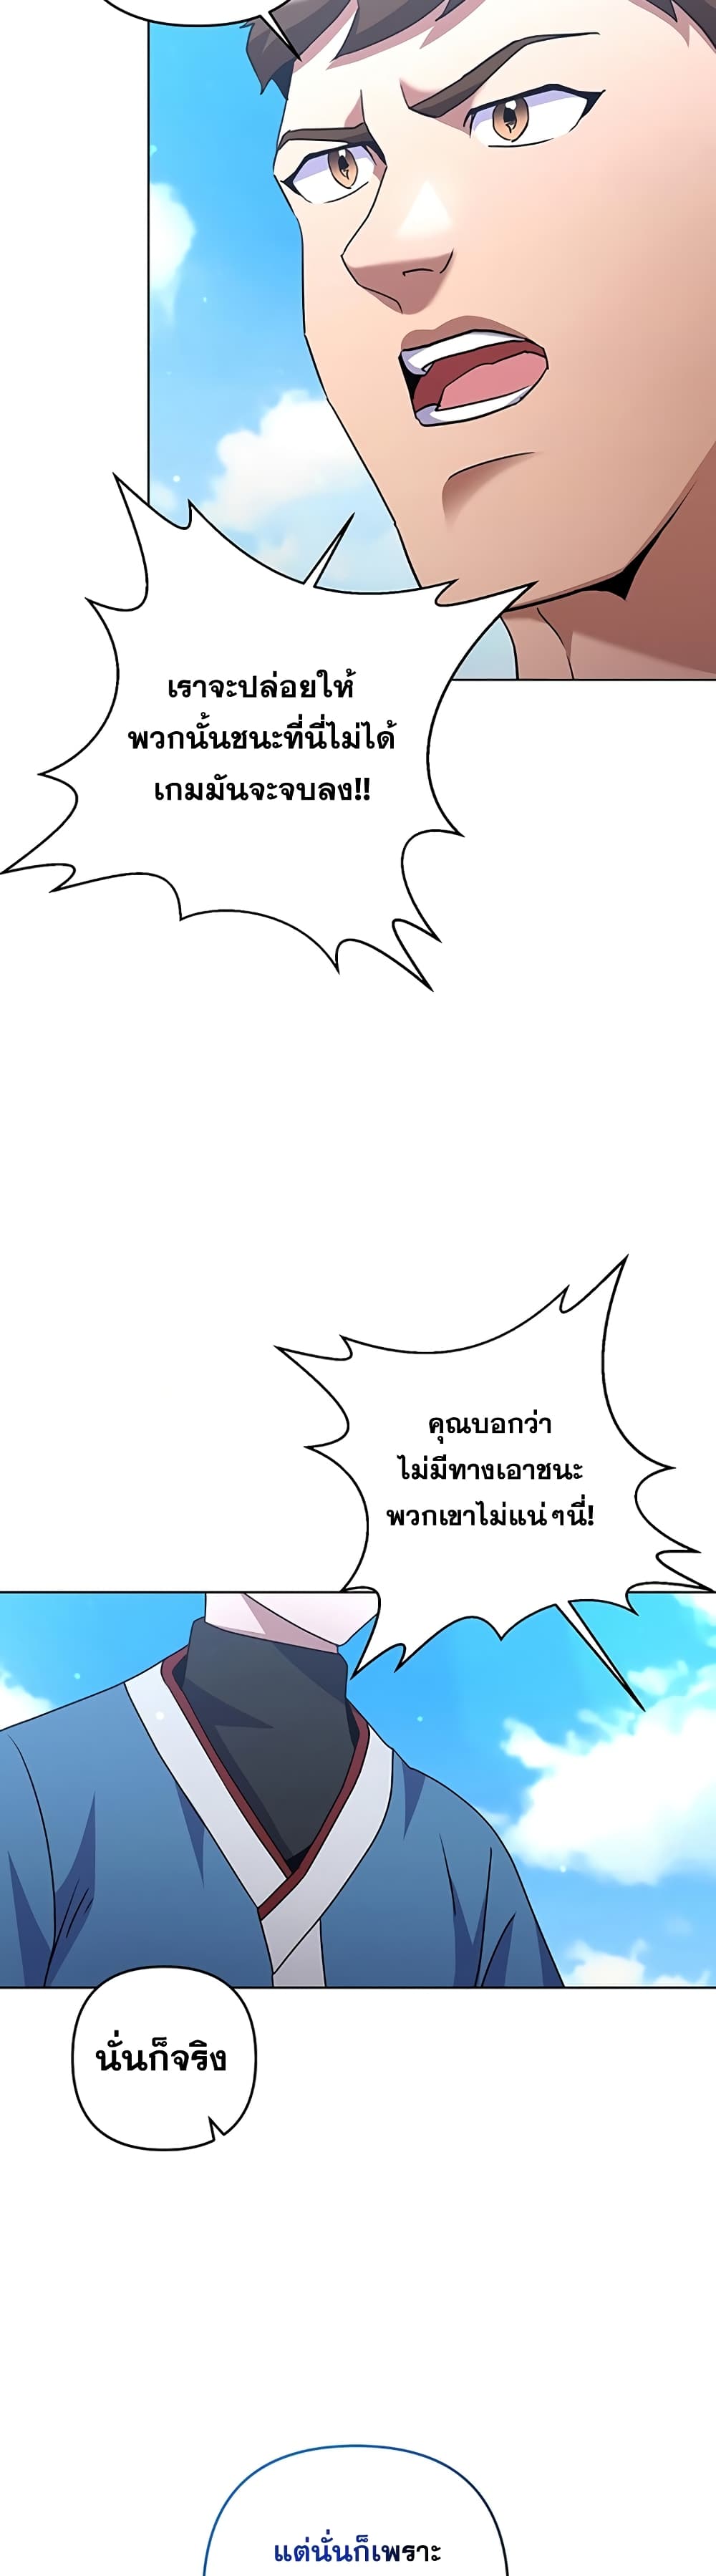 Surviving in an Action Manhwa 23-23